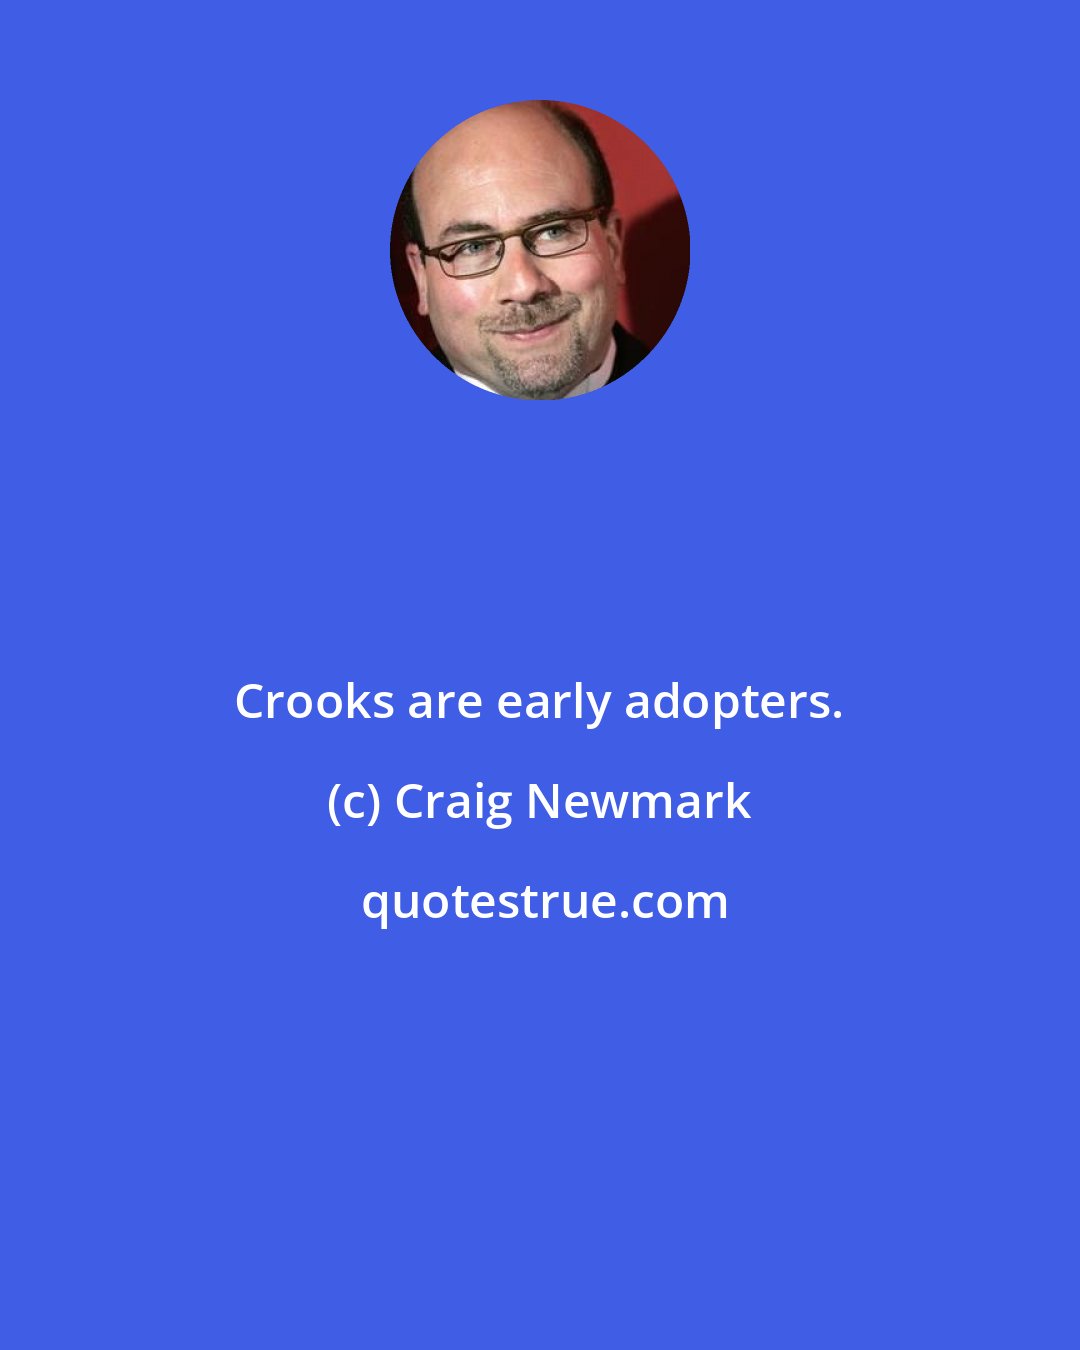 Craig Newmark: Crooks are early adopters.